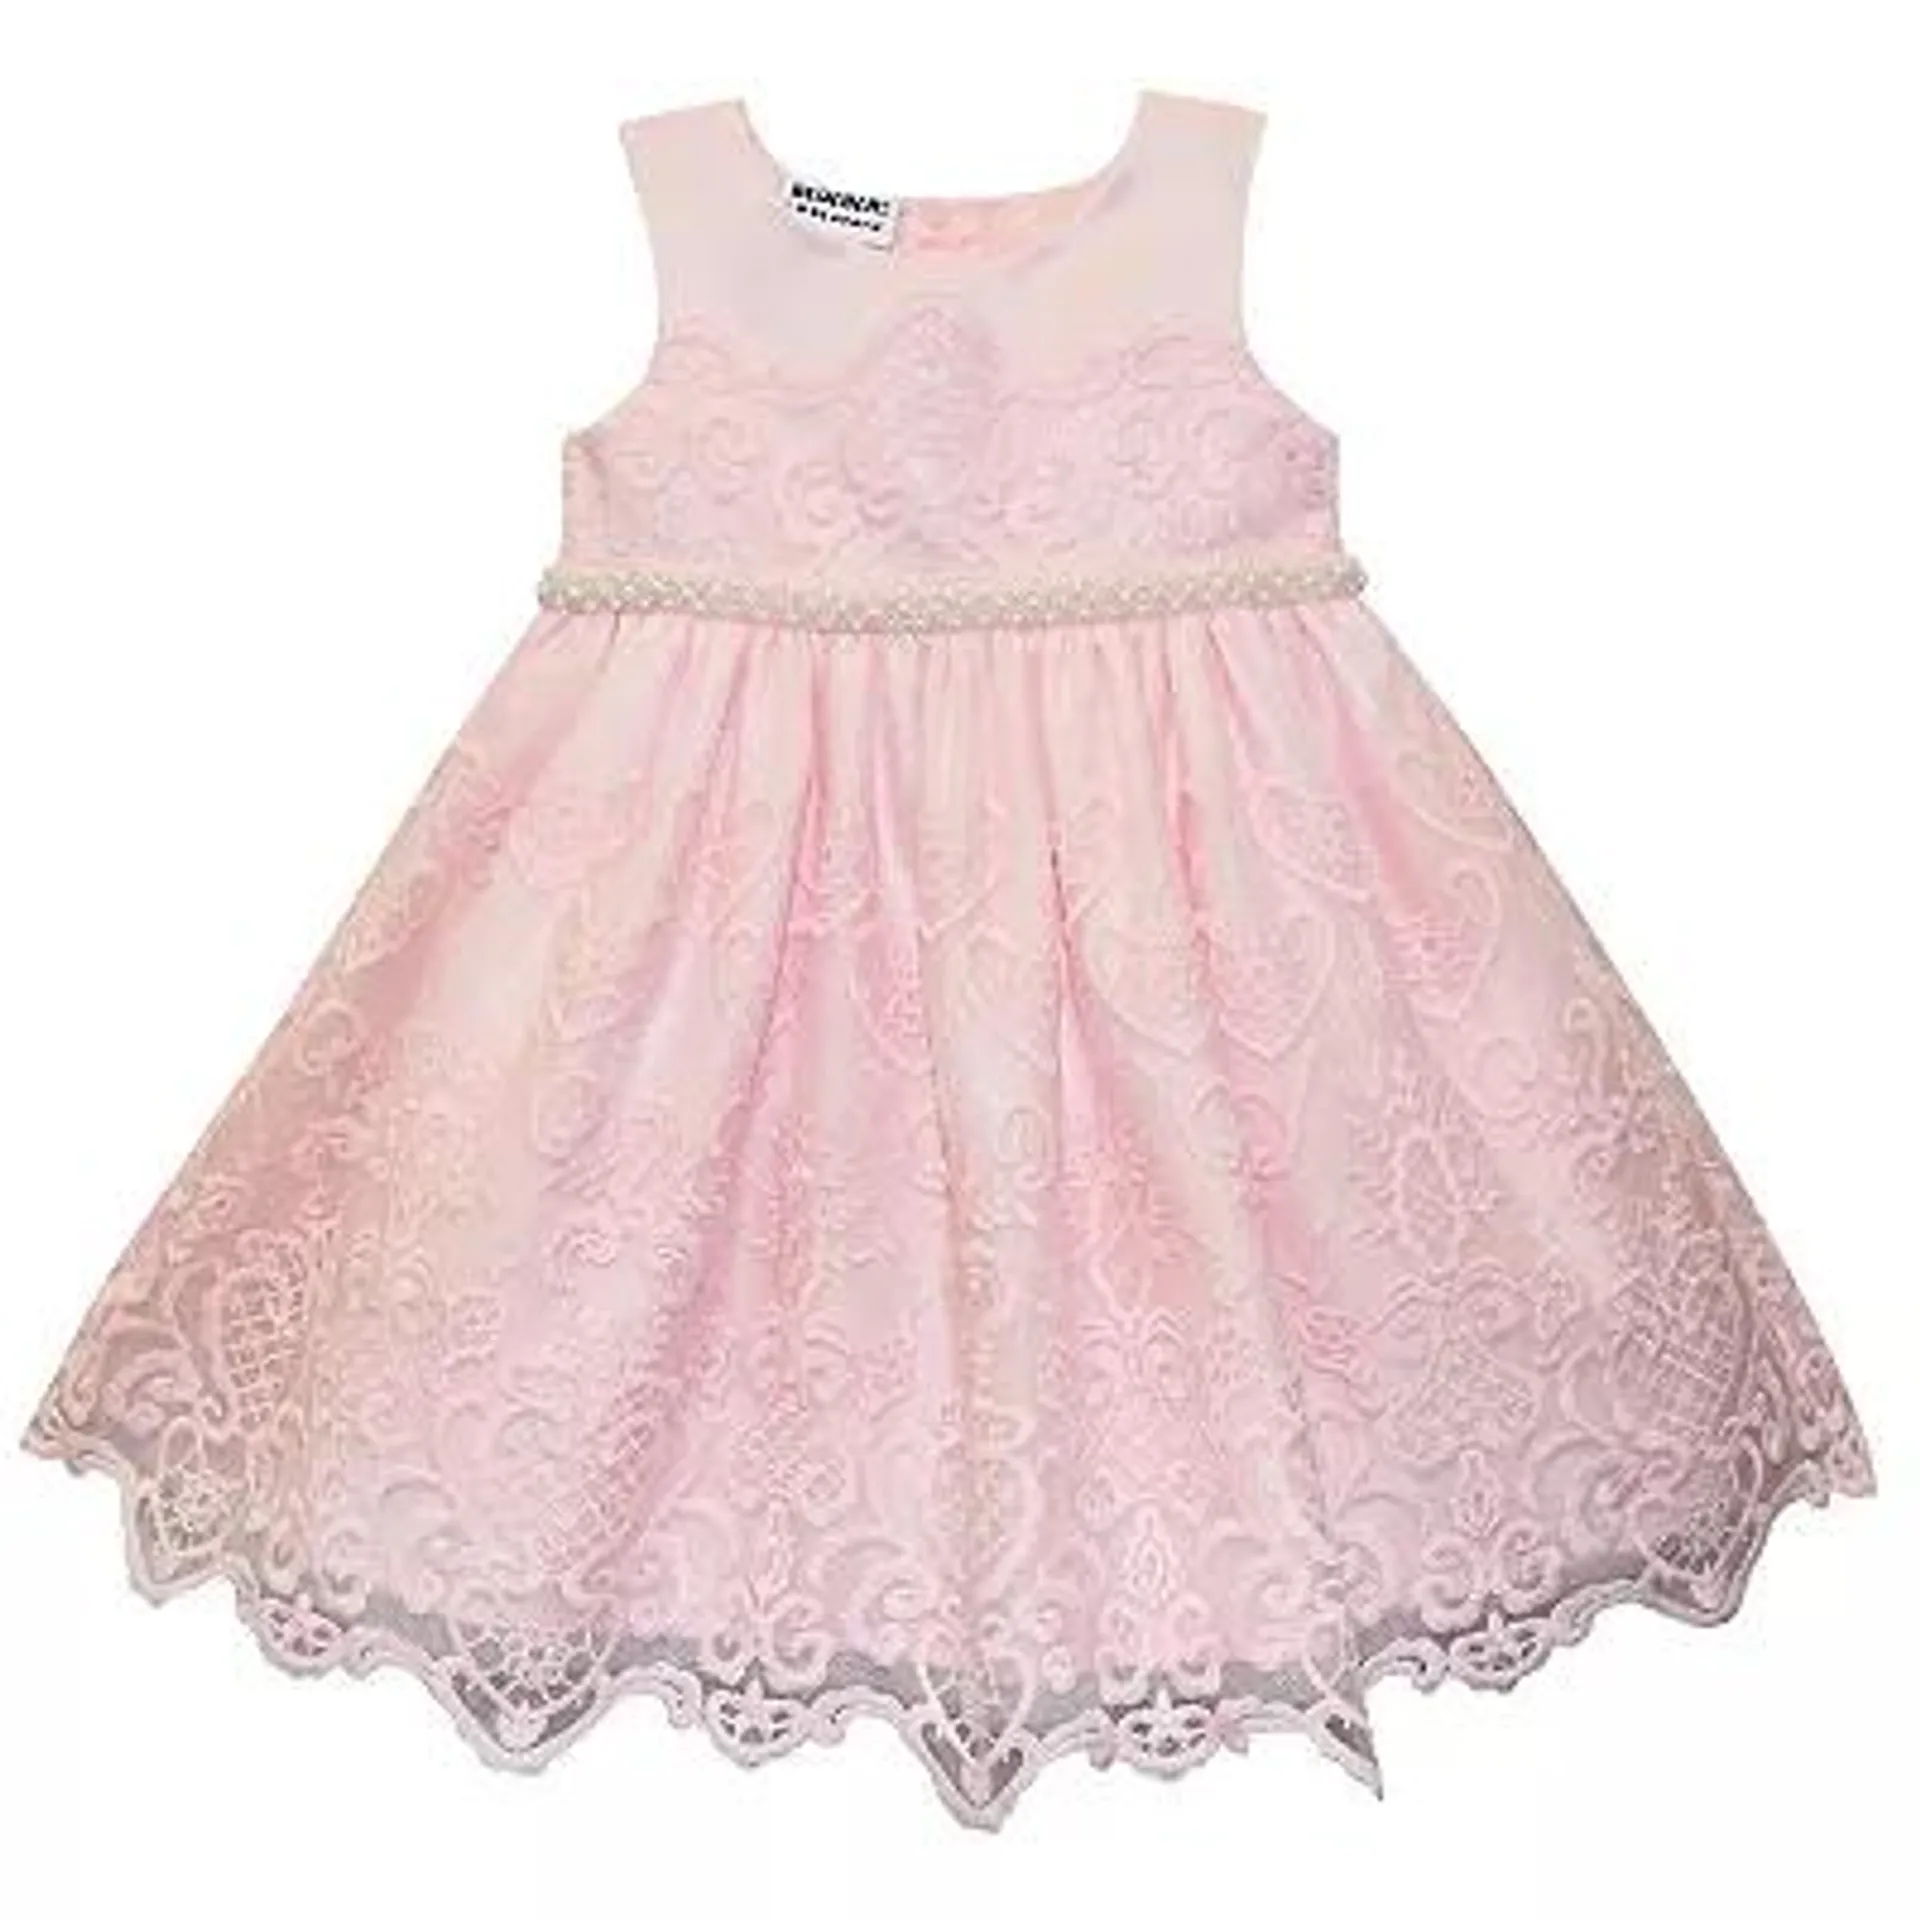 Toddler Girl Blueberi Boulevard Fit and Flare Lace Dress